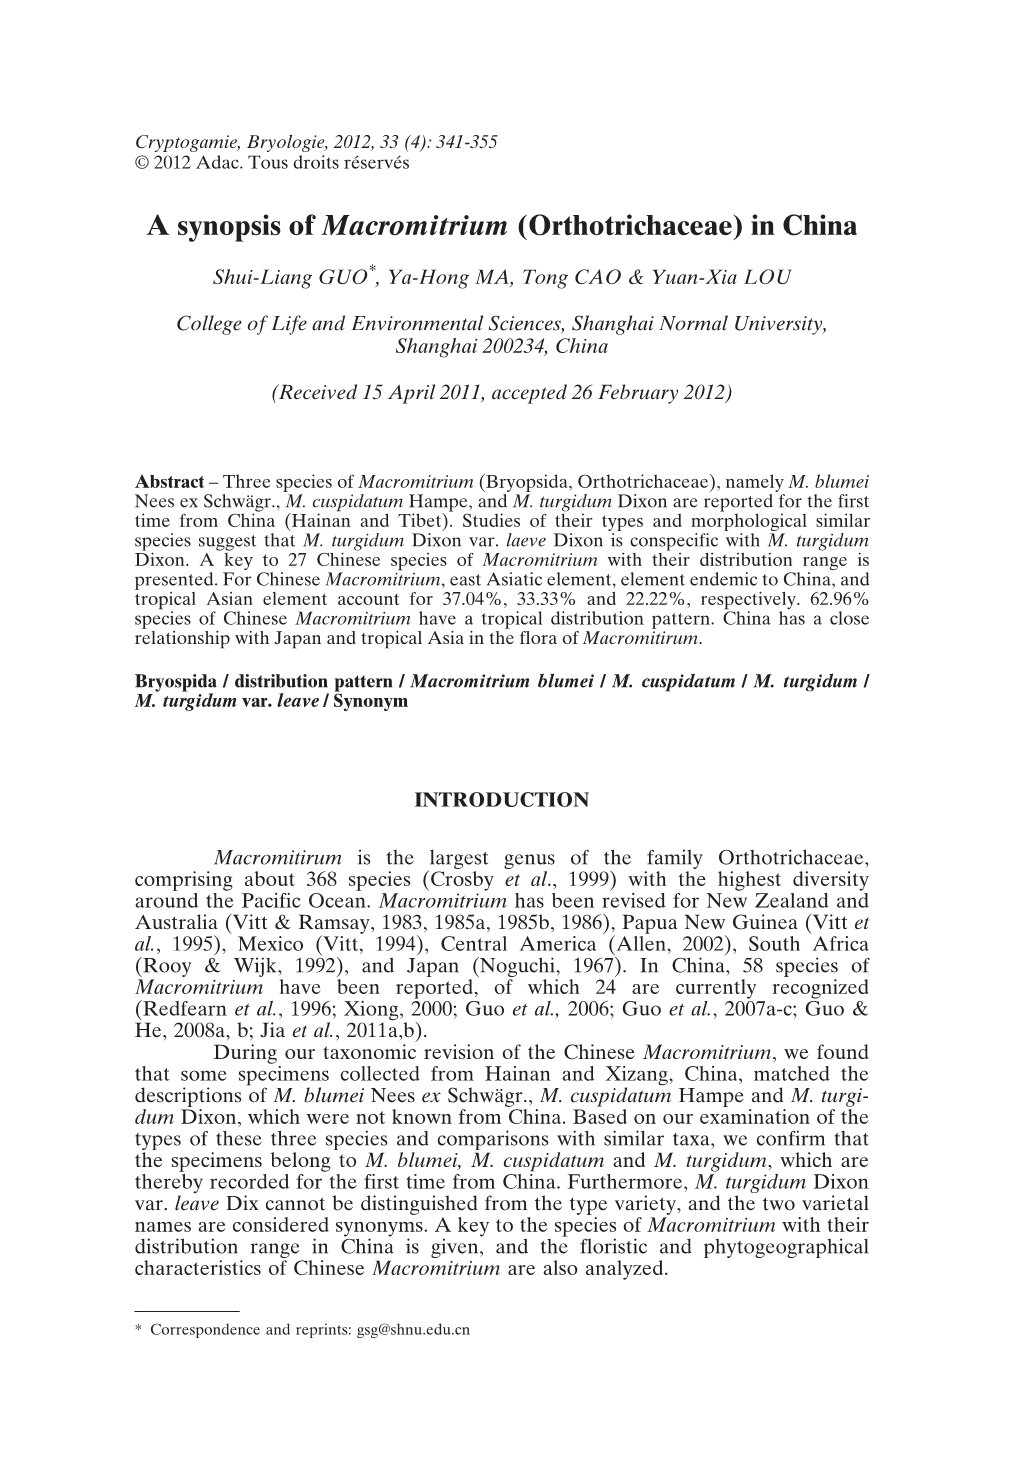 A Synopsis of Macromitrium (Orthotrichaceae) in China